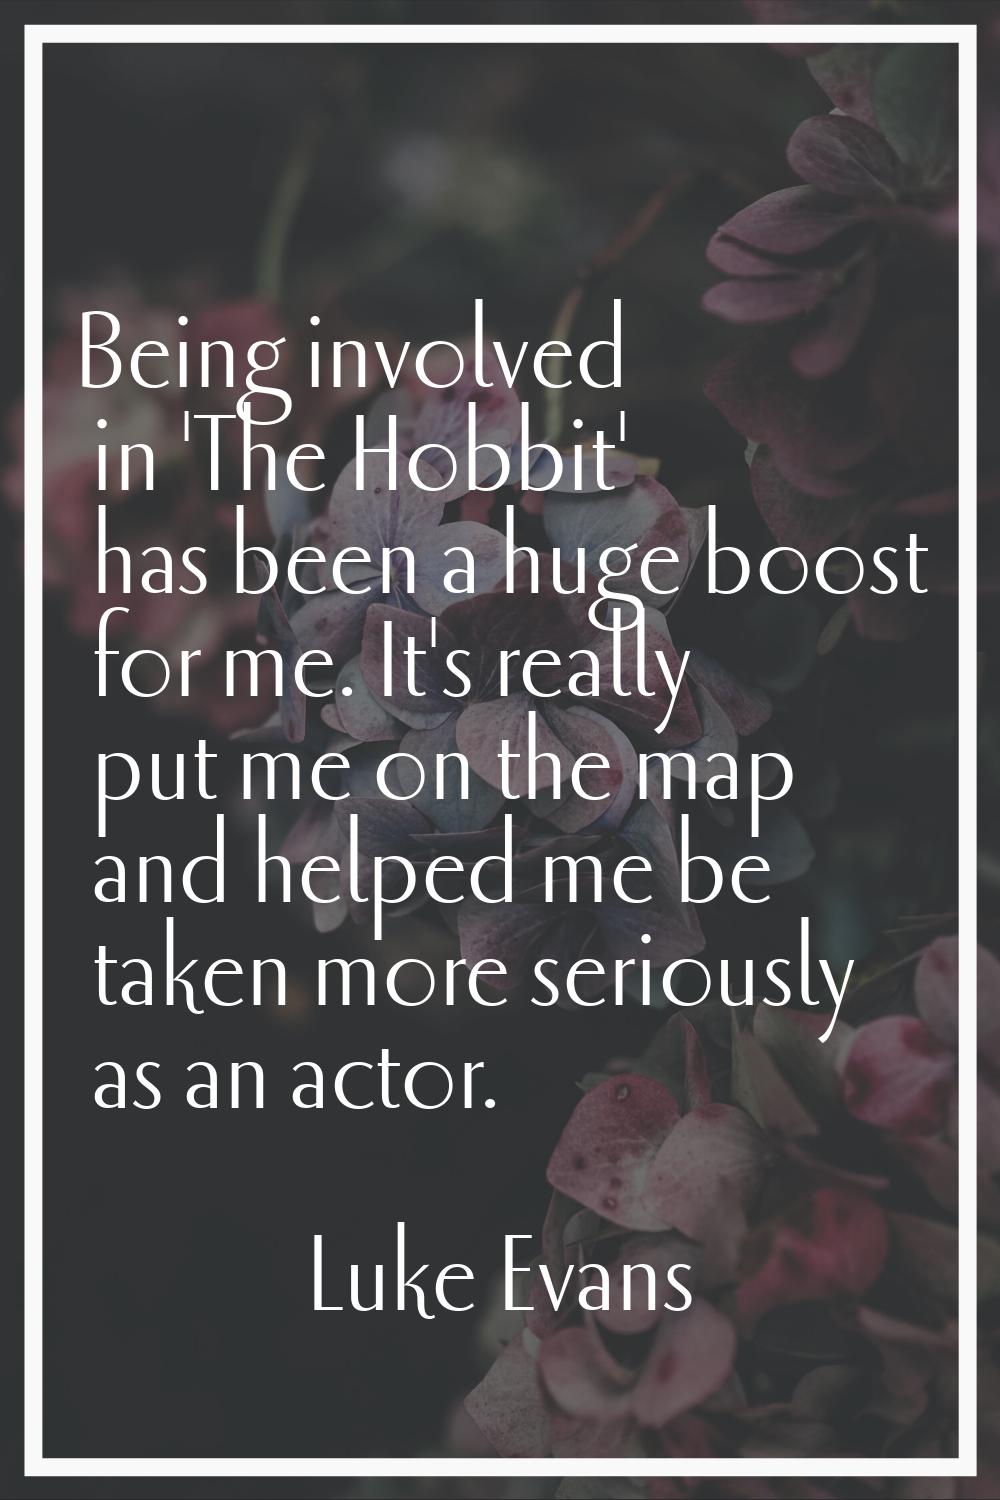 Being involved in 'The Hobbit' has been a huge boost for me. It's really put me on the map and help